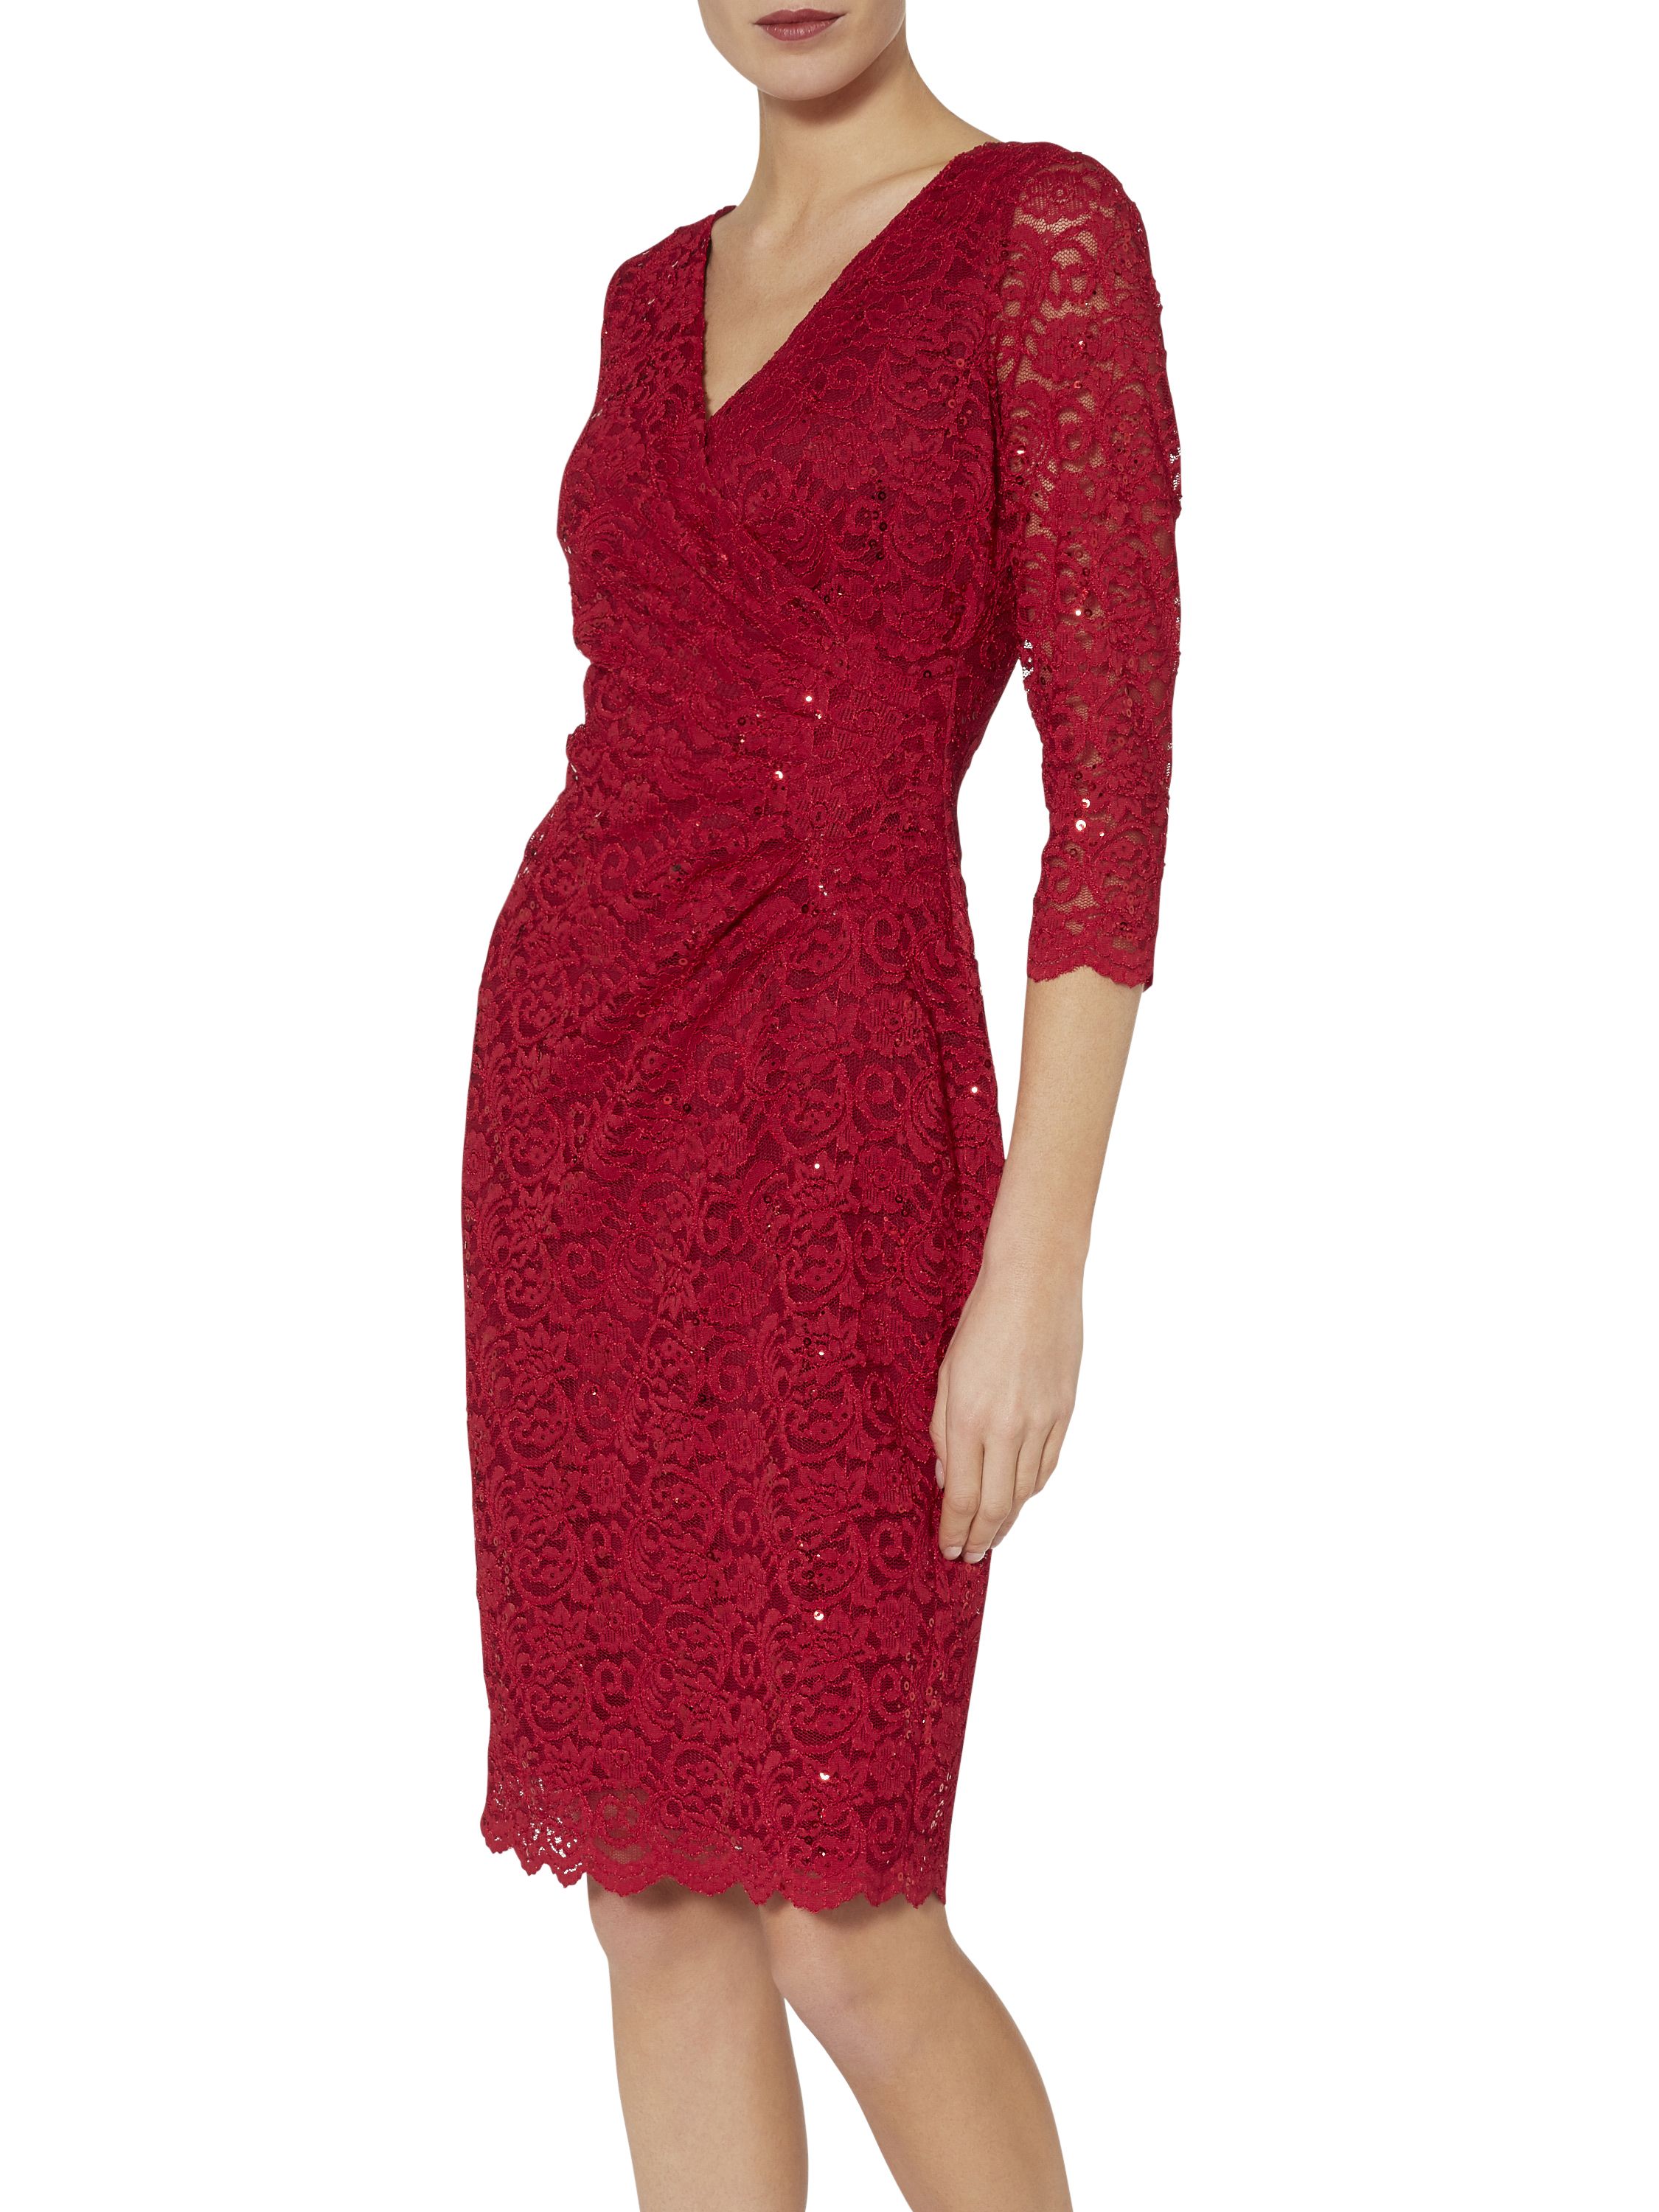 Look dazzling in this beautiful dress by Gina Bacconi. Crafted in a stretch sequin lace it features a wrap top bodice with a gathered side to create a flattering silhouette and a v shaped neckline front and back. This dress is lined with sheer sleeves with a scalloped hem and sleeve detail.